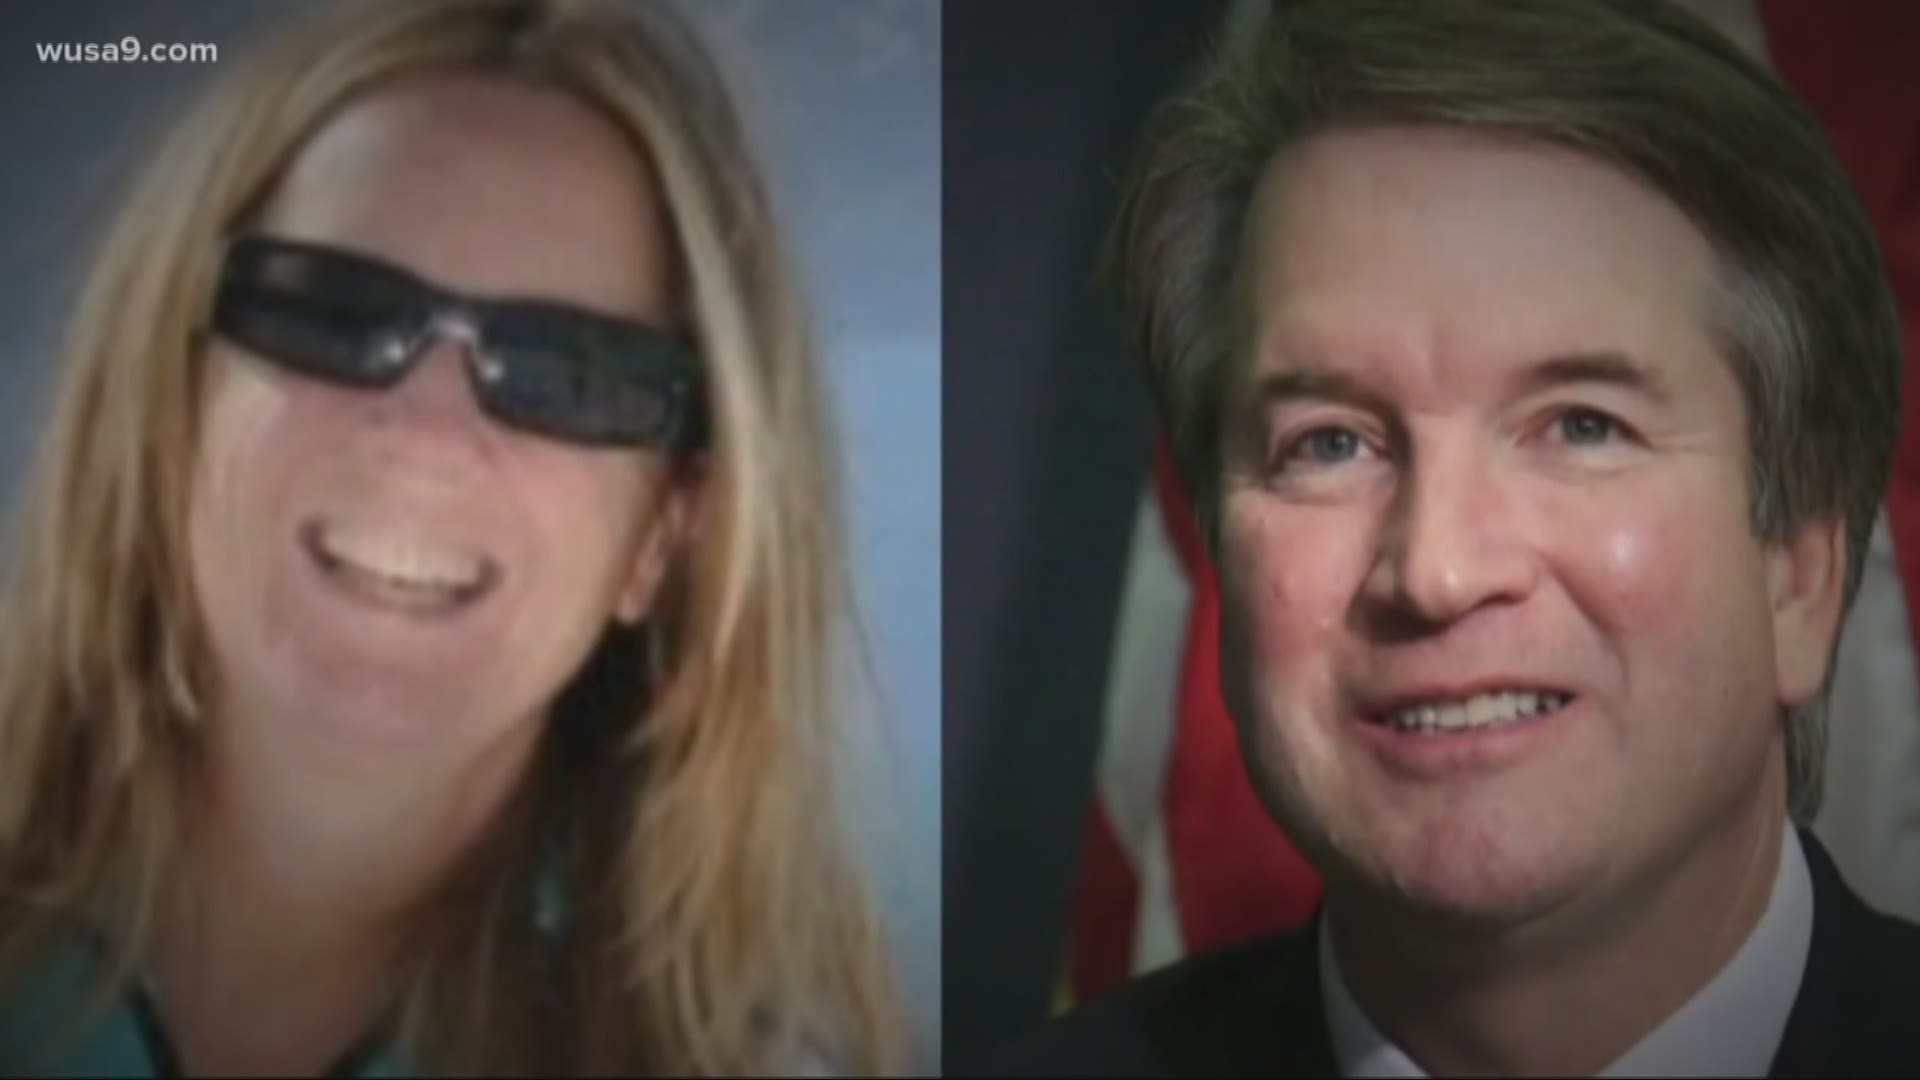 Christine Blasey Ford's testimony to the Senate Judiciary Committee will be held in a small hearing room on Thursday. Now, many locals hoping to attend the hearing are concerned they won't be allowed in.